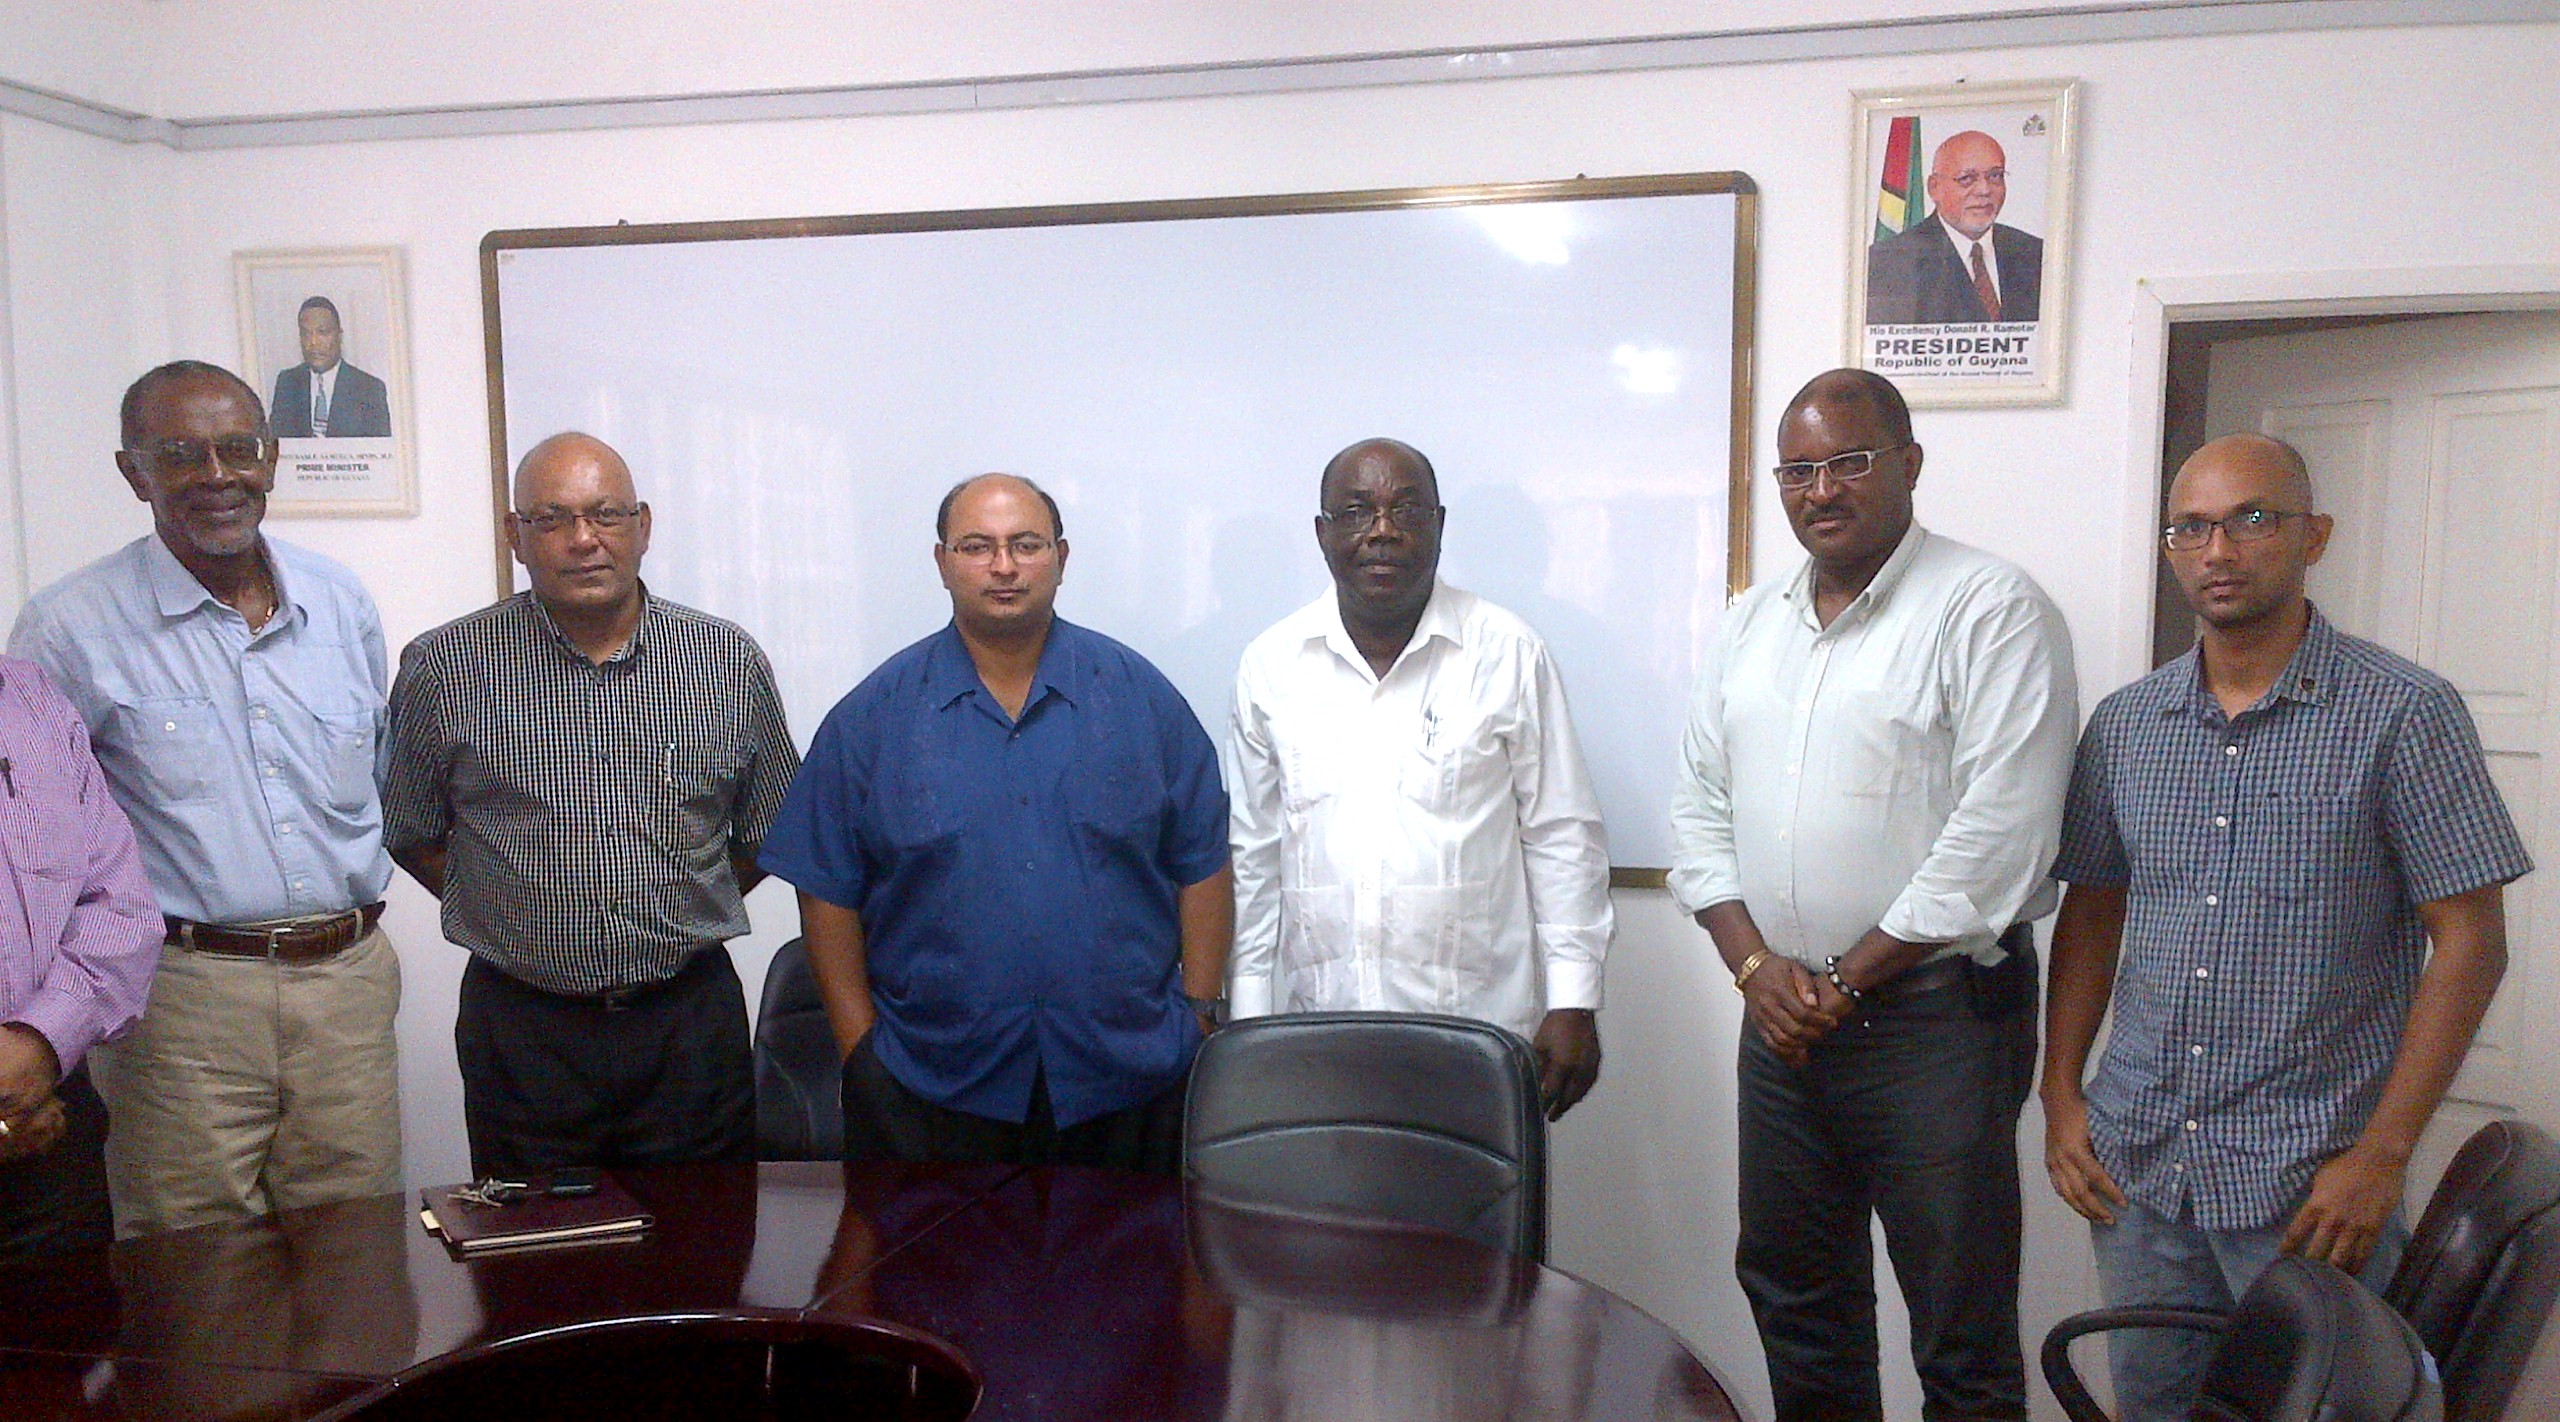 GCCI Representatives met with the Board of Directors of GPL on November 15, 2013